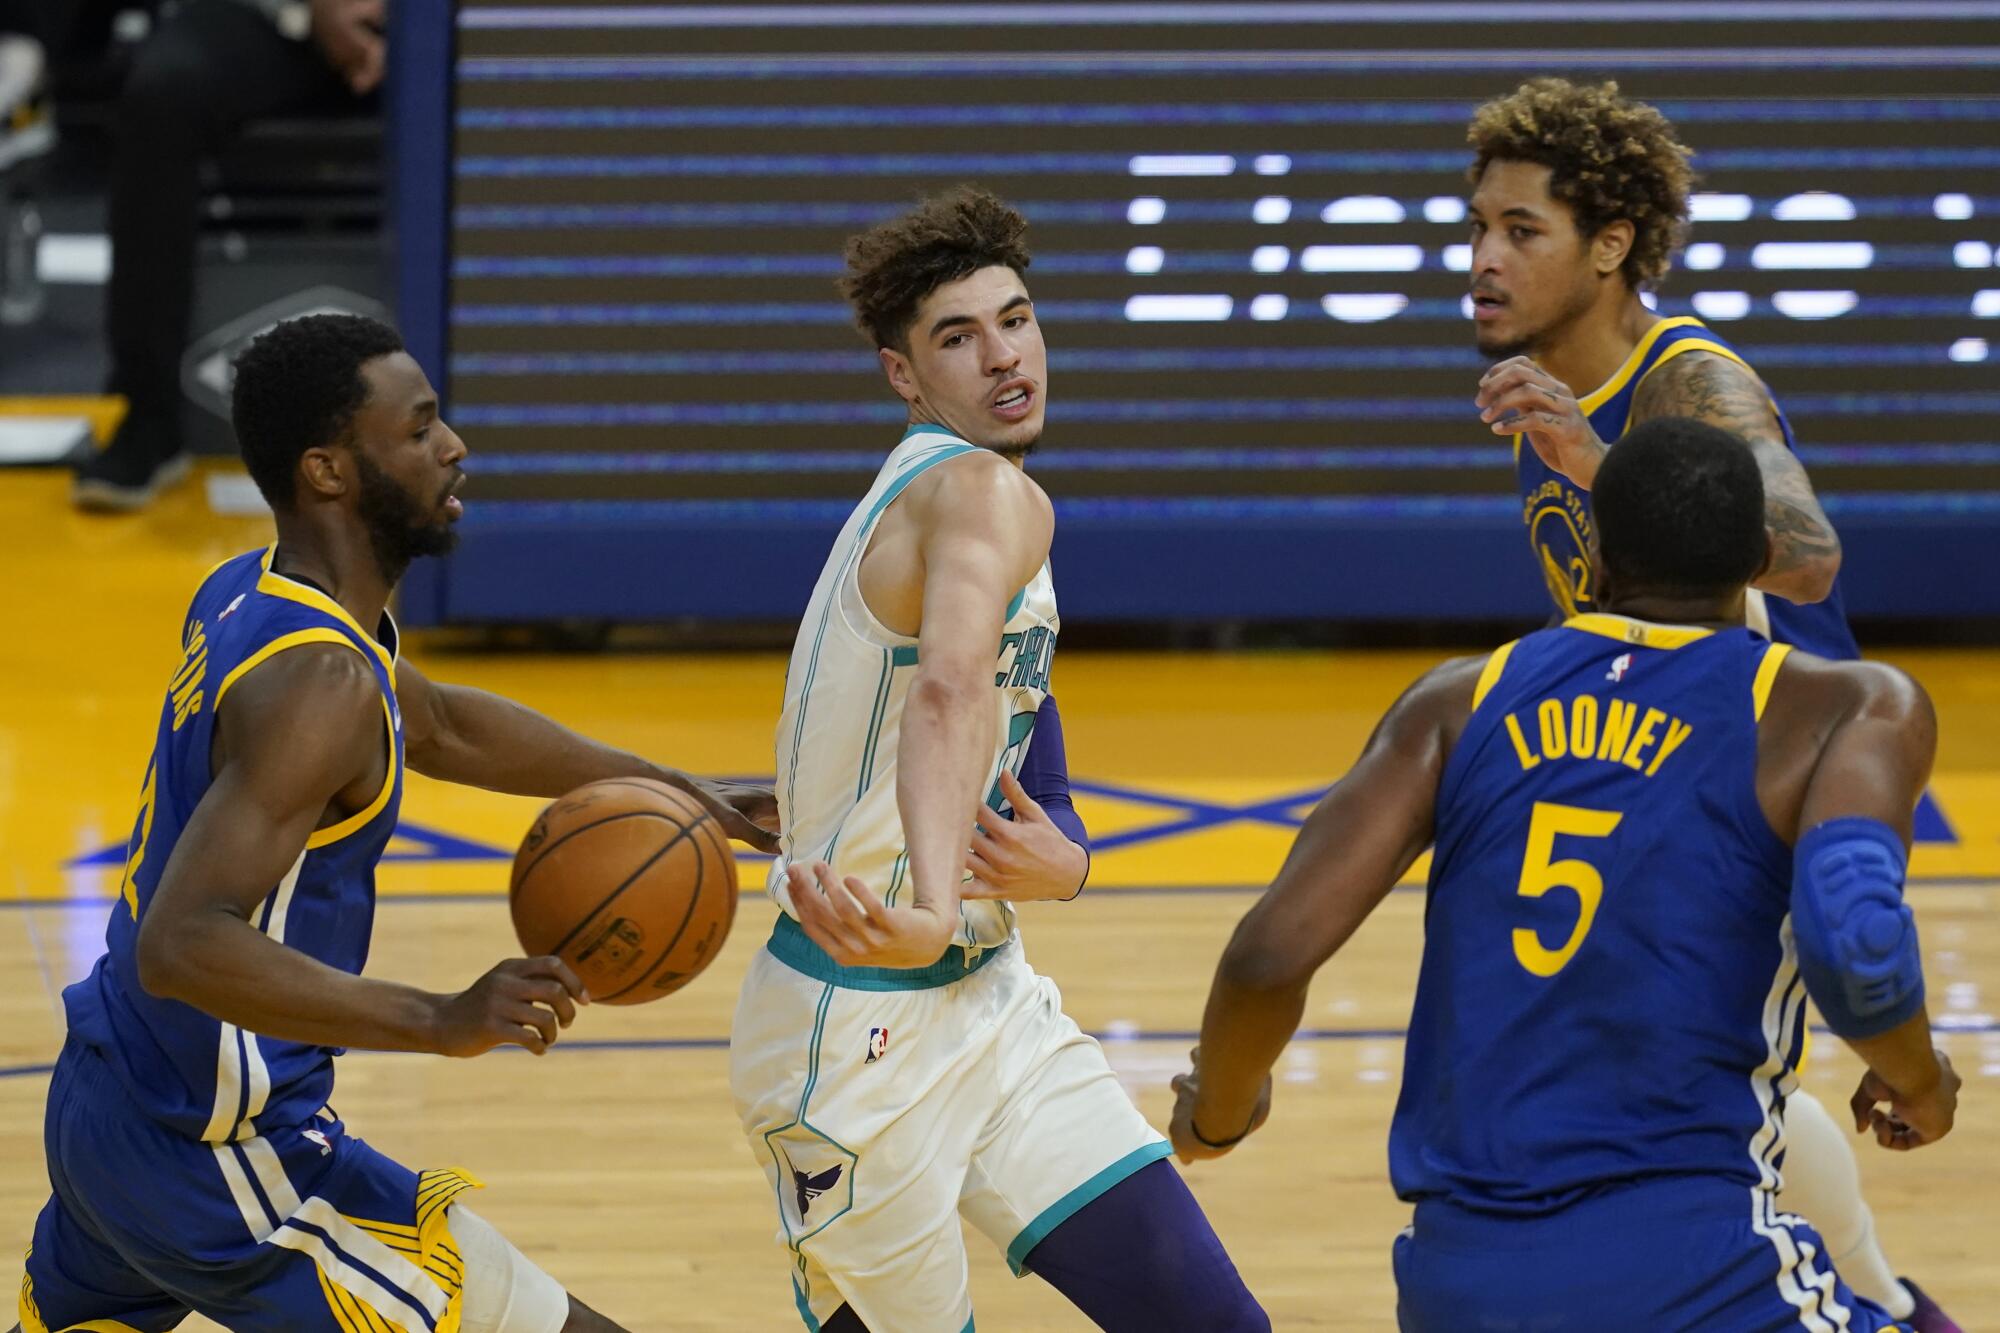 Hornets guard LaMelo Ball flips a pass while surrounded by Warriors defenders.